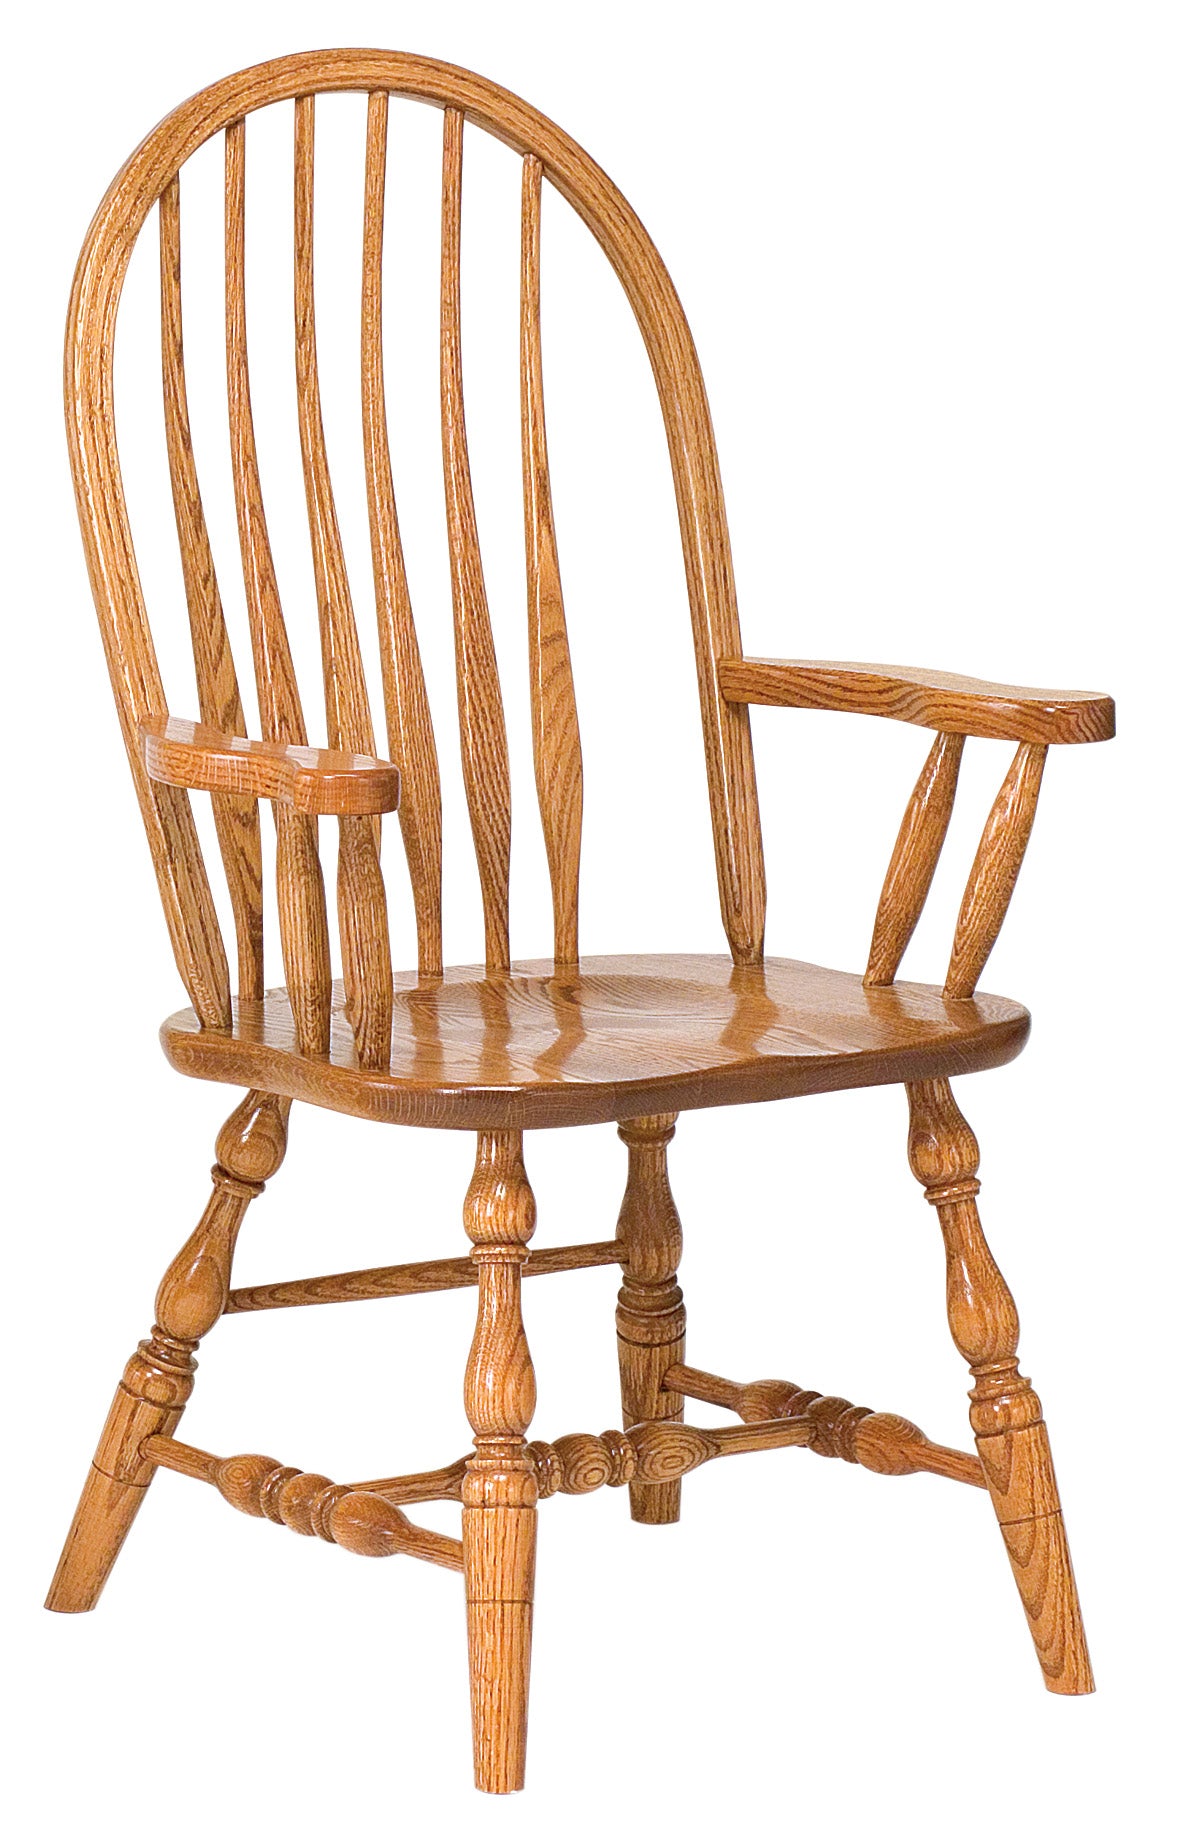 Amish Bent Feather Bow Dining Chair